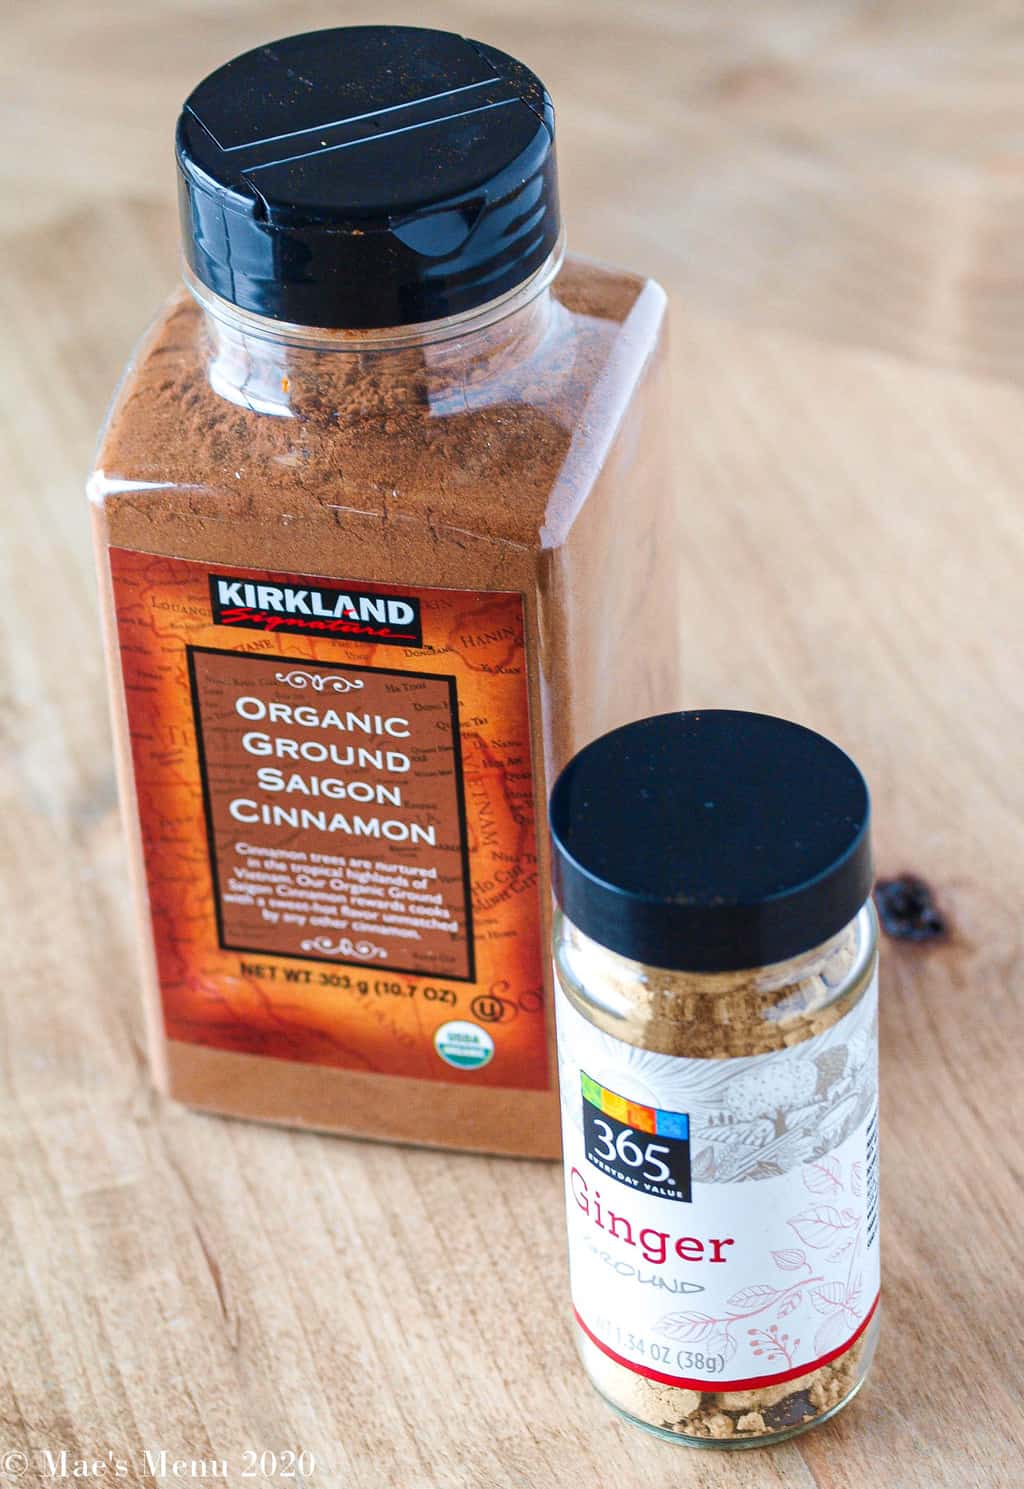 A large bottle of kirkland's saigon cinnamon next to a small bottle of ginger powder